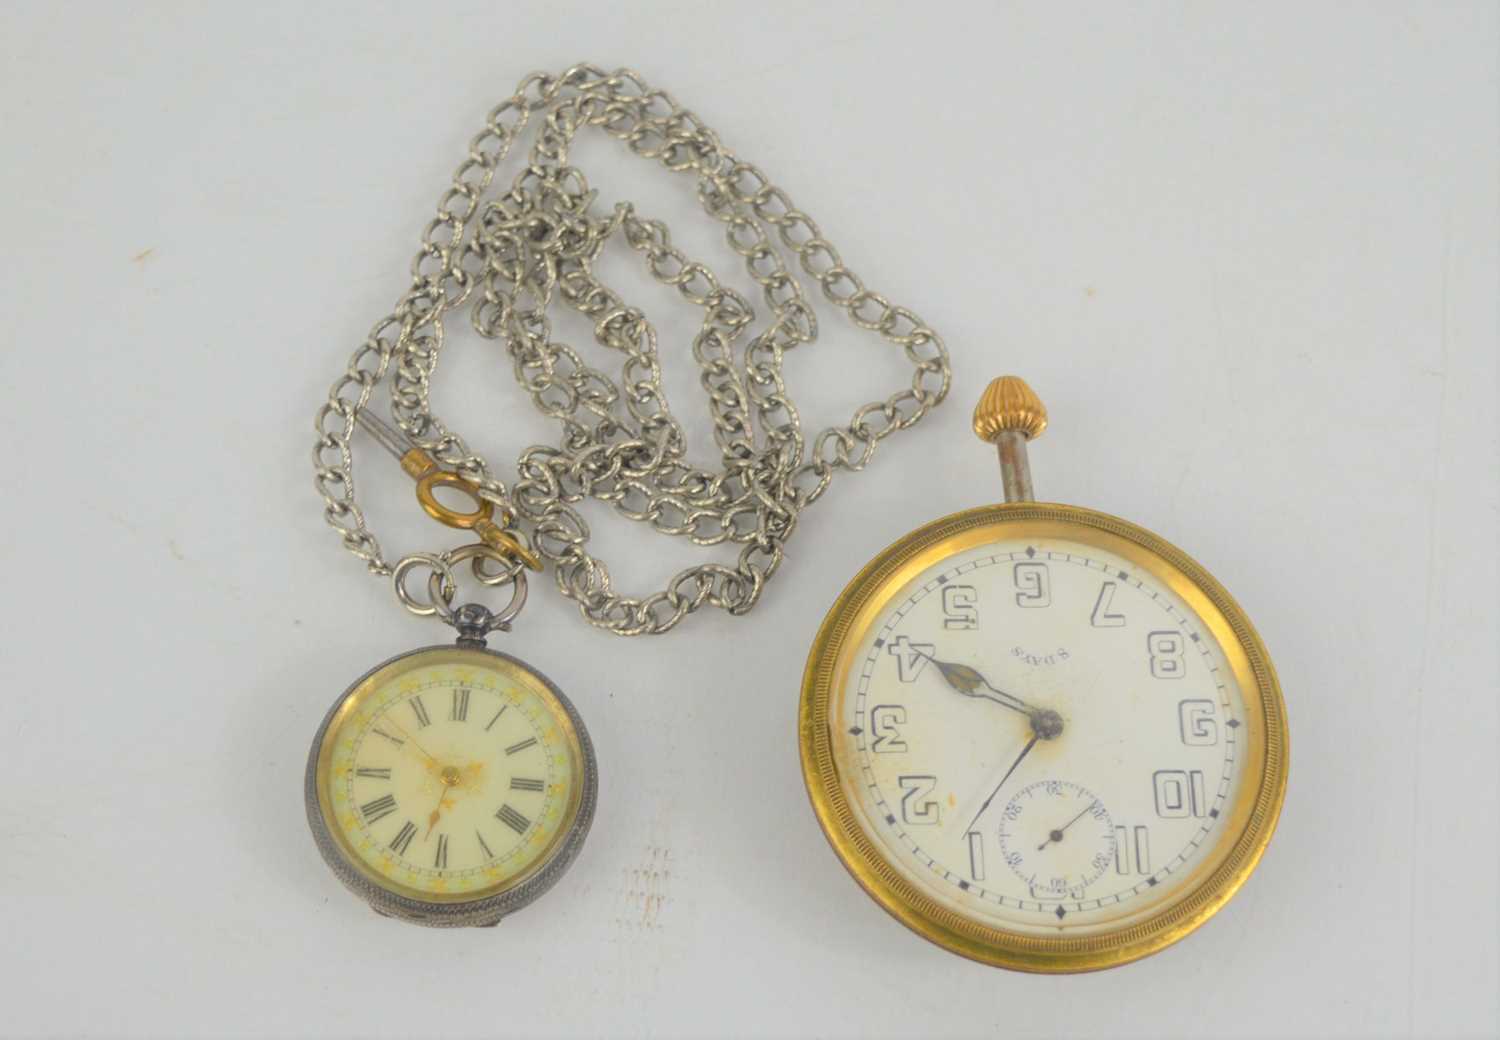 An early 20th century 8 day travel clock made by the Octavia watch company together with a ladies